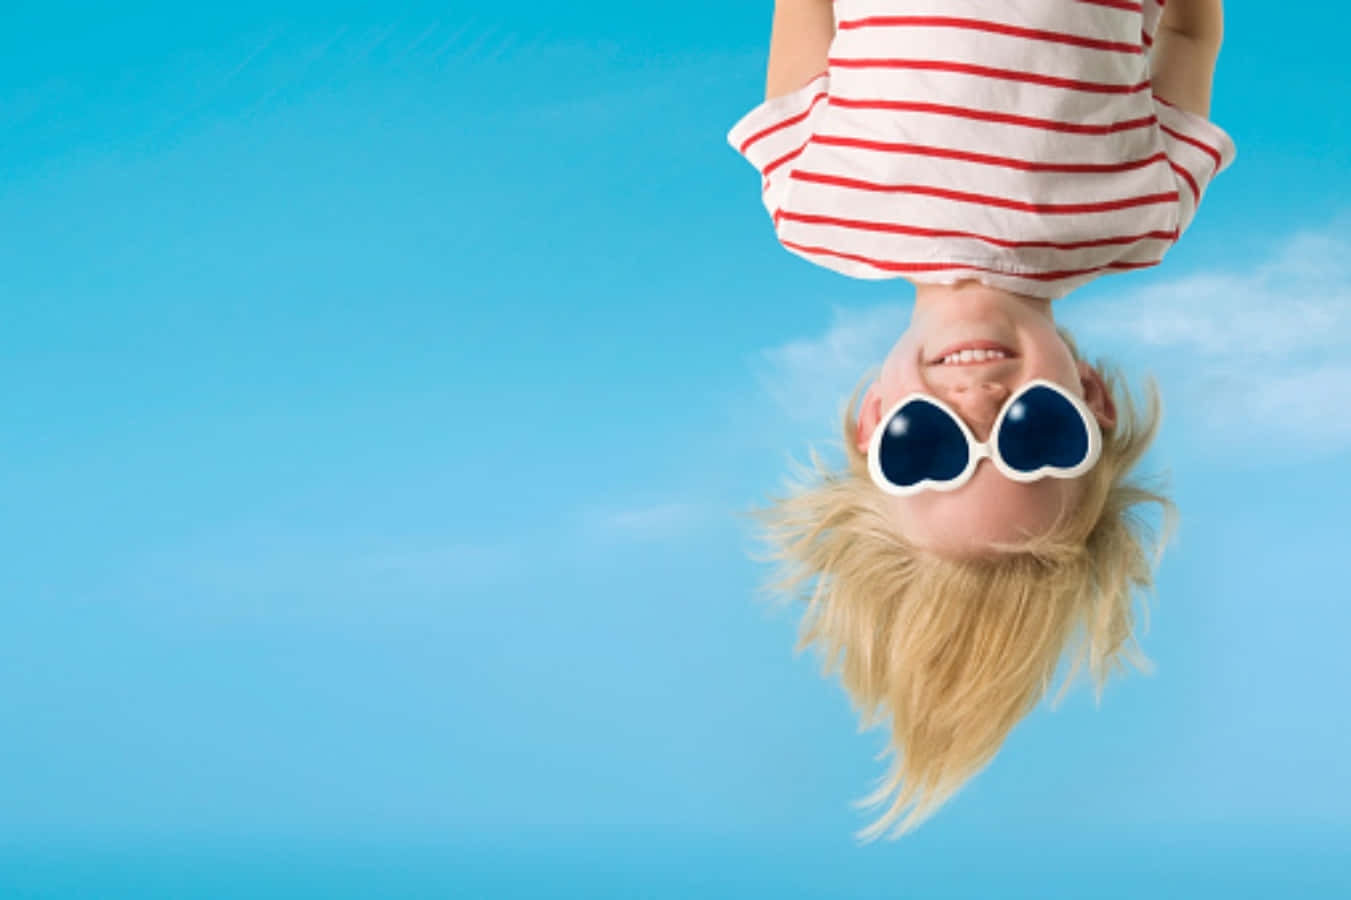 A Girl Is Upside Down In The Air With Sunglasses